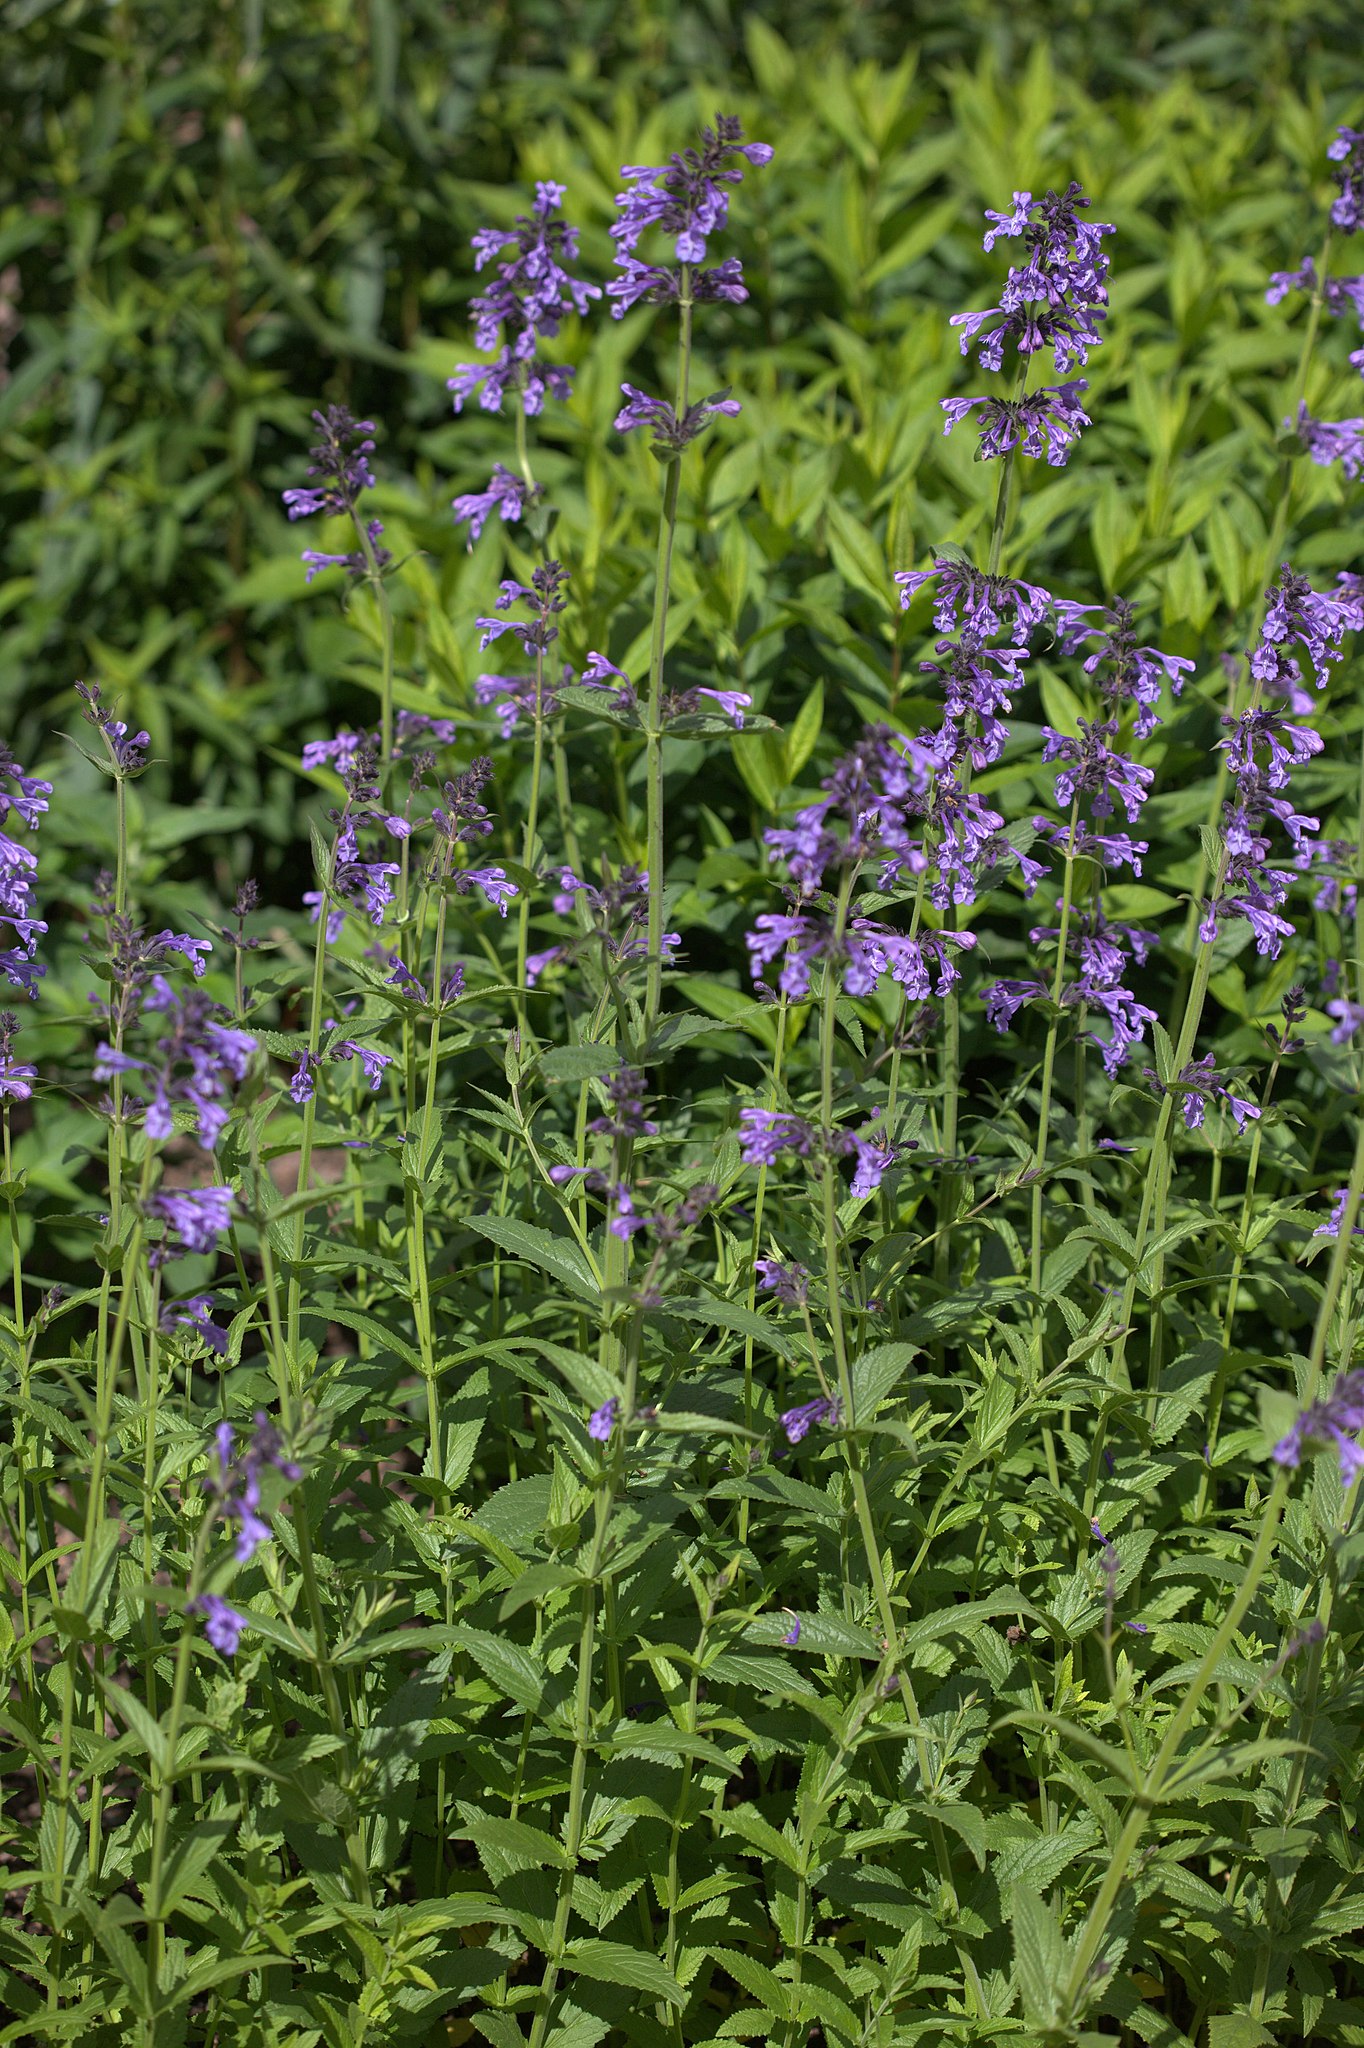 purple-blue flowers with green leaves and stems